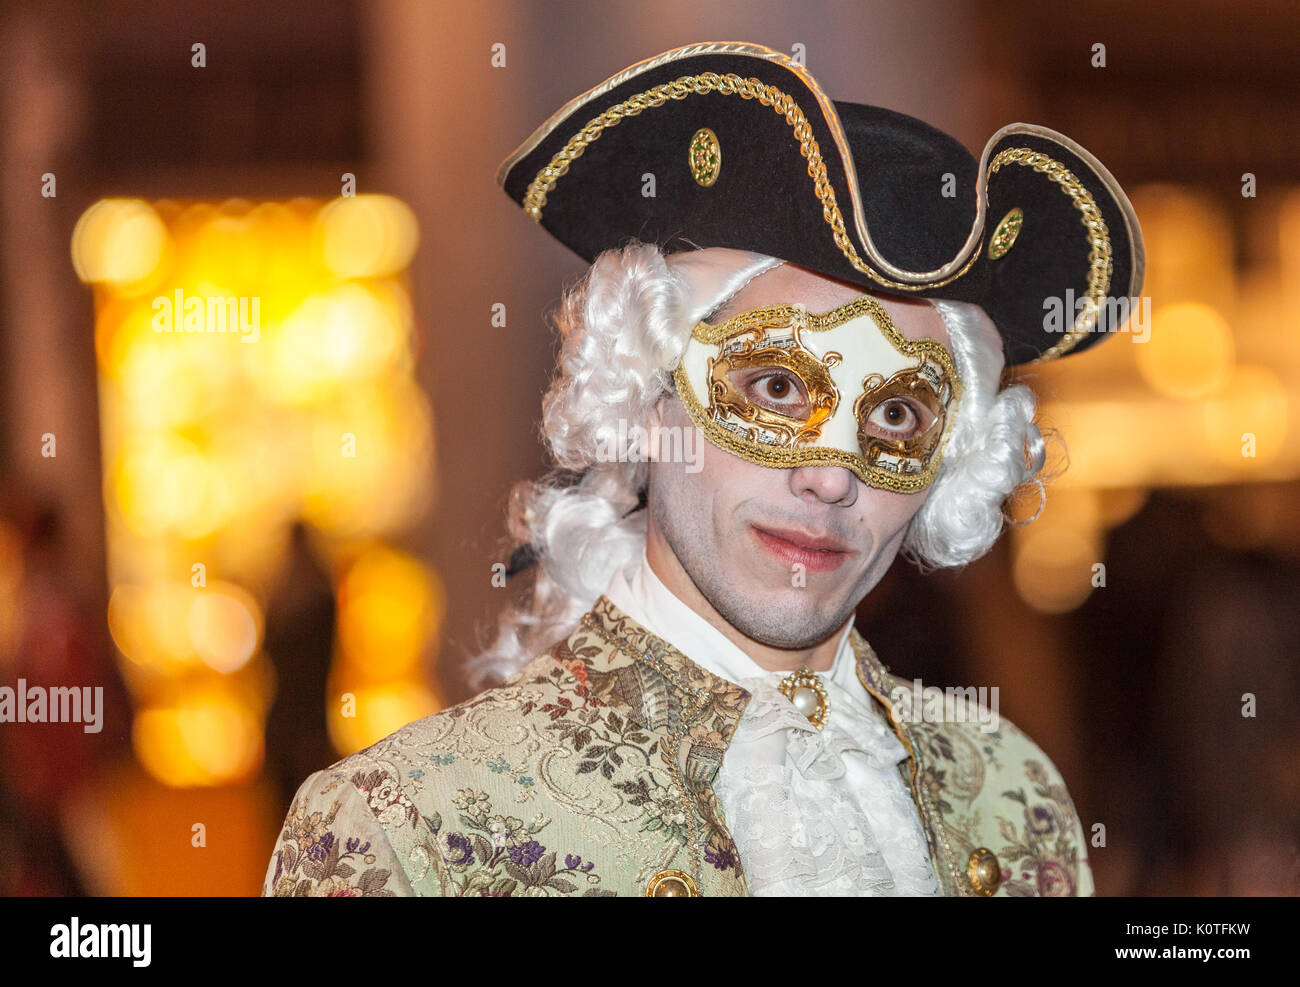 Venice, Italy- February 26th, 2011: Environmental portrait of a young man disguised in a marquis and wearing a traditional mask during the Venice Carn Stock Photo